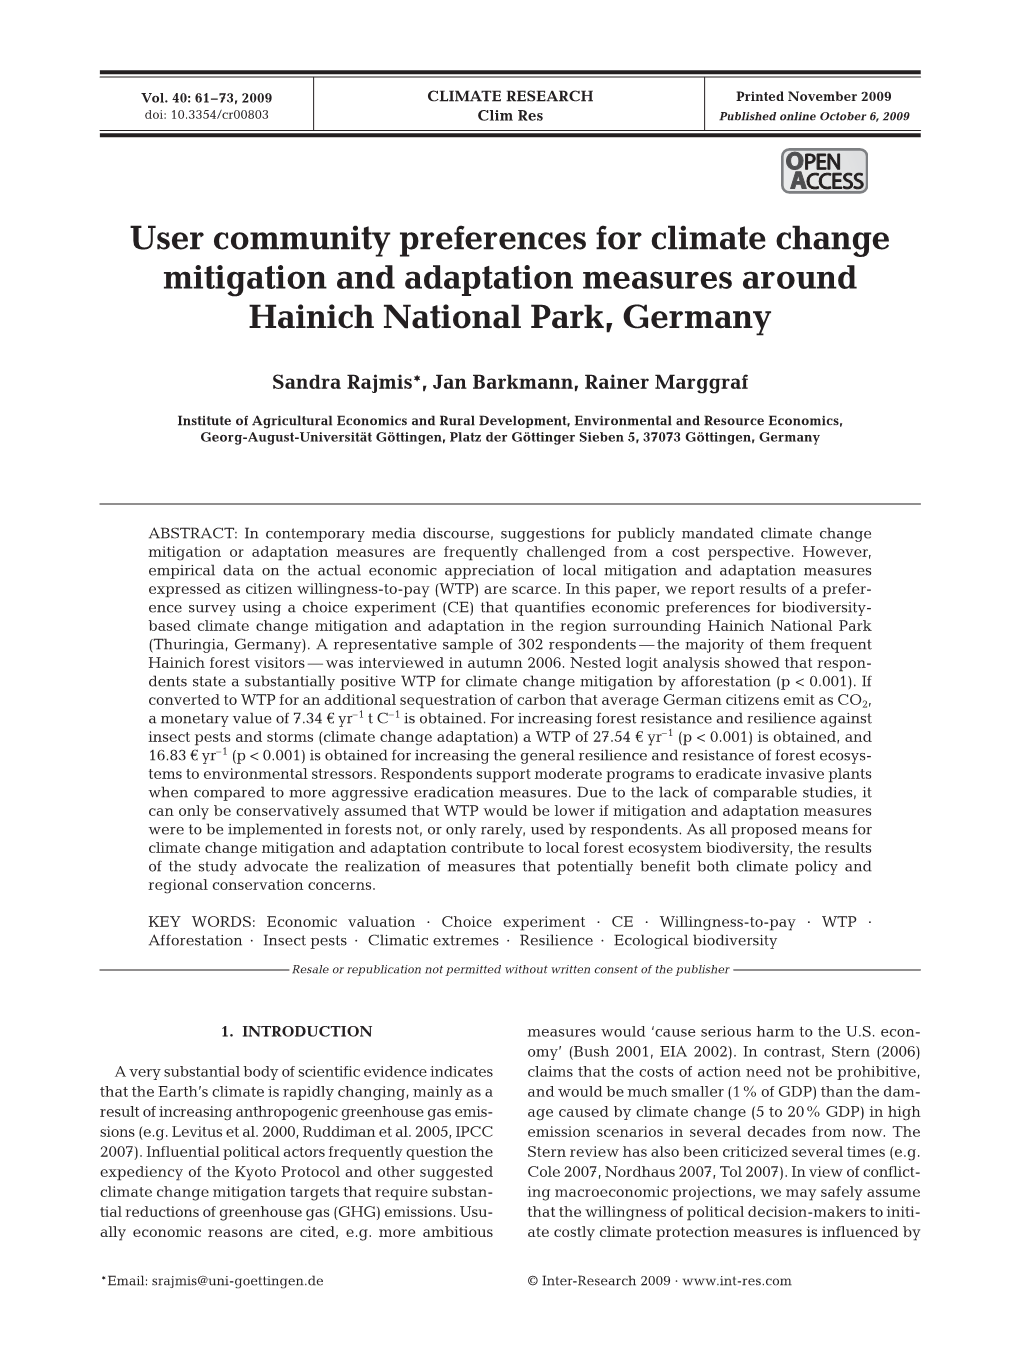 User Community Preferences for Climate Change Mitigation and Adaptation Measures Around Hainich National Park, Germany